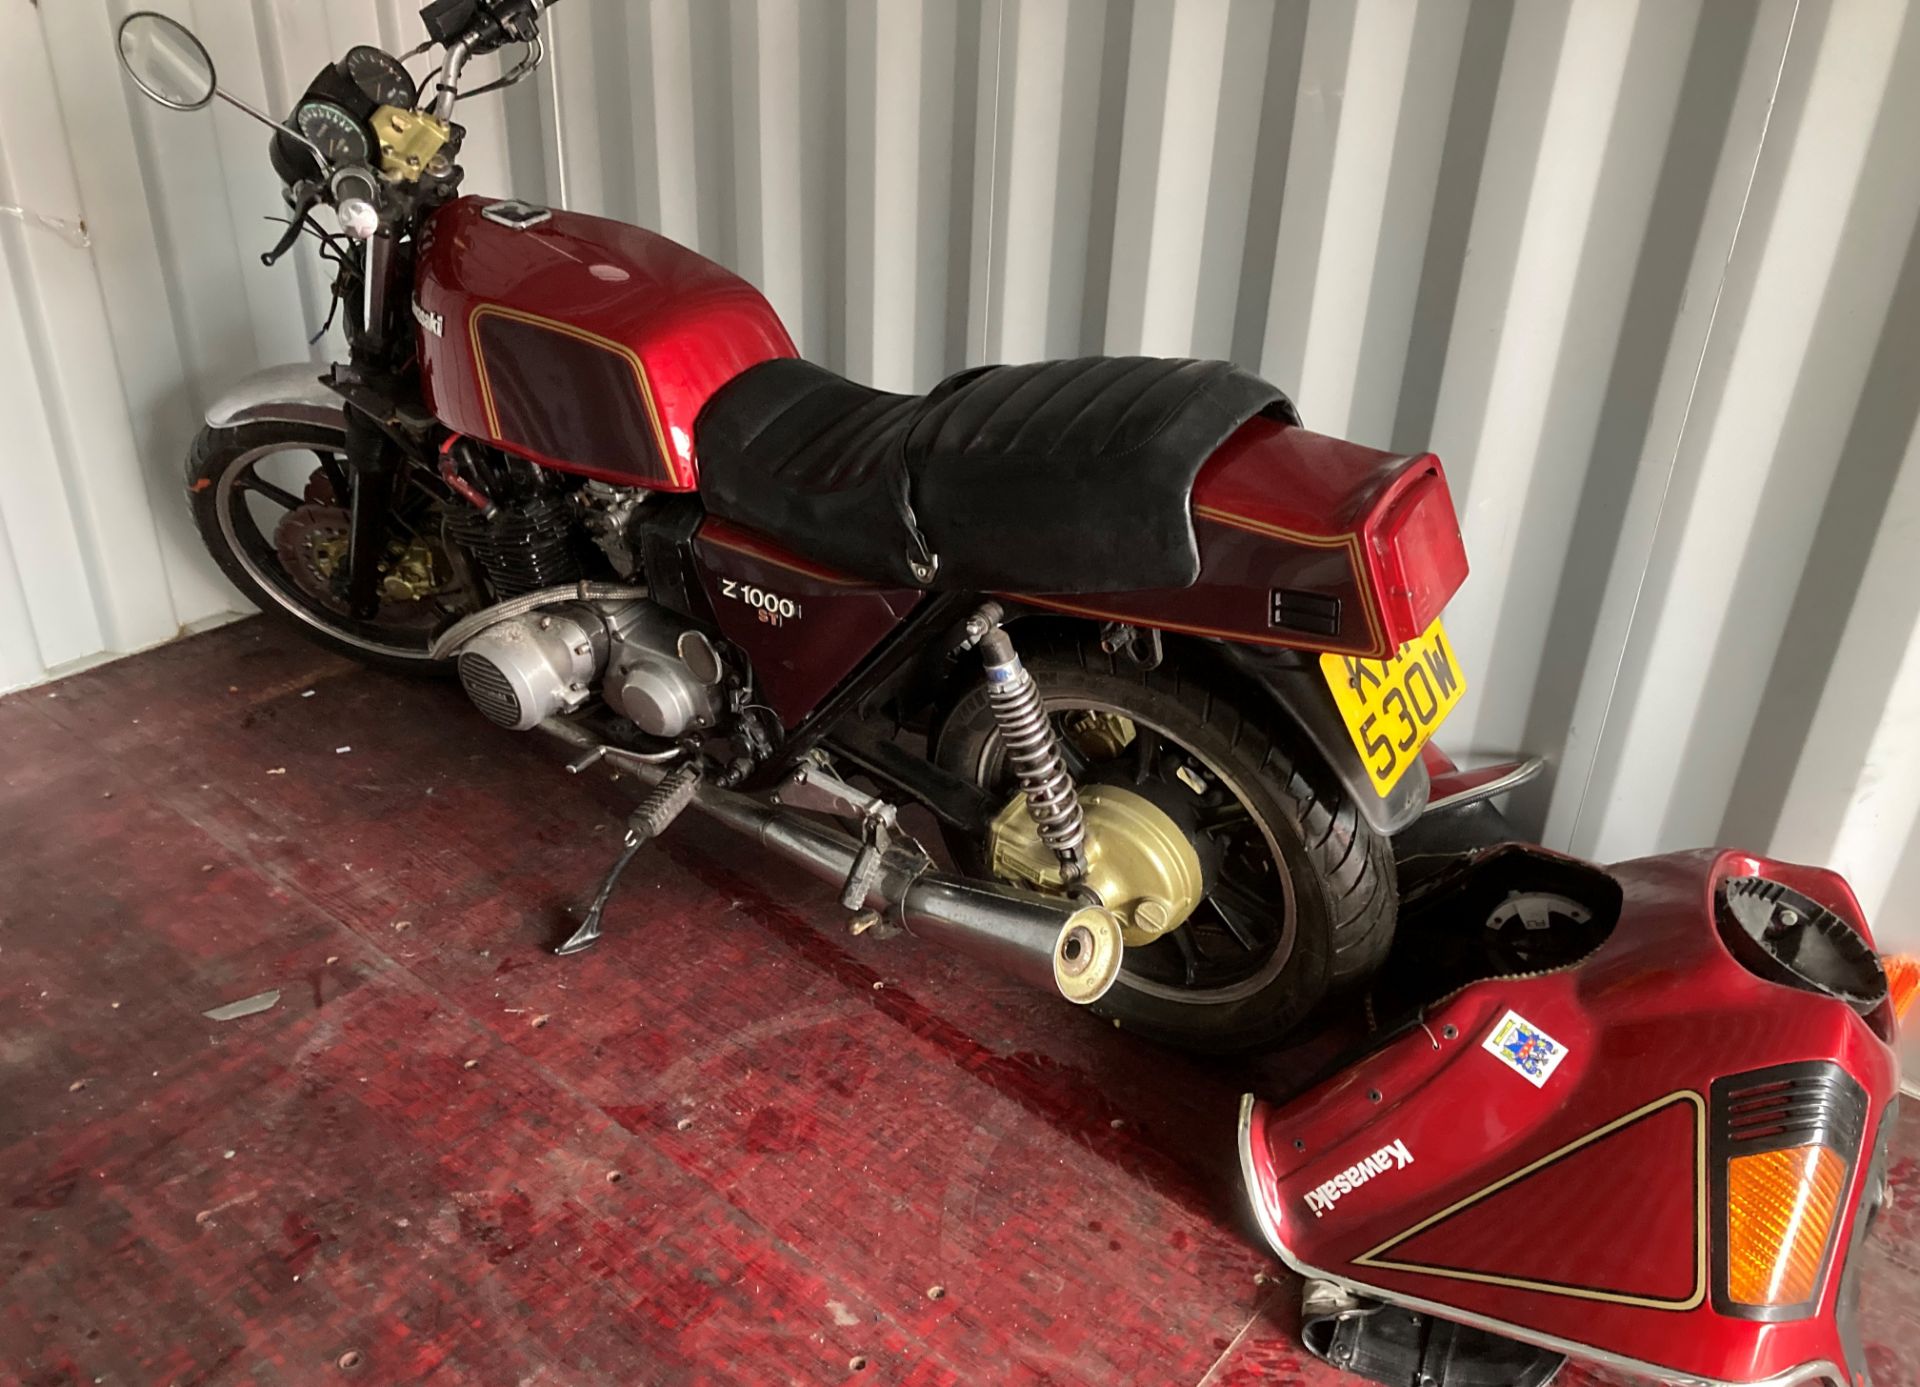 KAWASAKI 1015cc MOTORCYCLE - Petrol - Red. Sold as a project restoration/spares/repairs. - Image 5 of 11